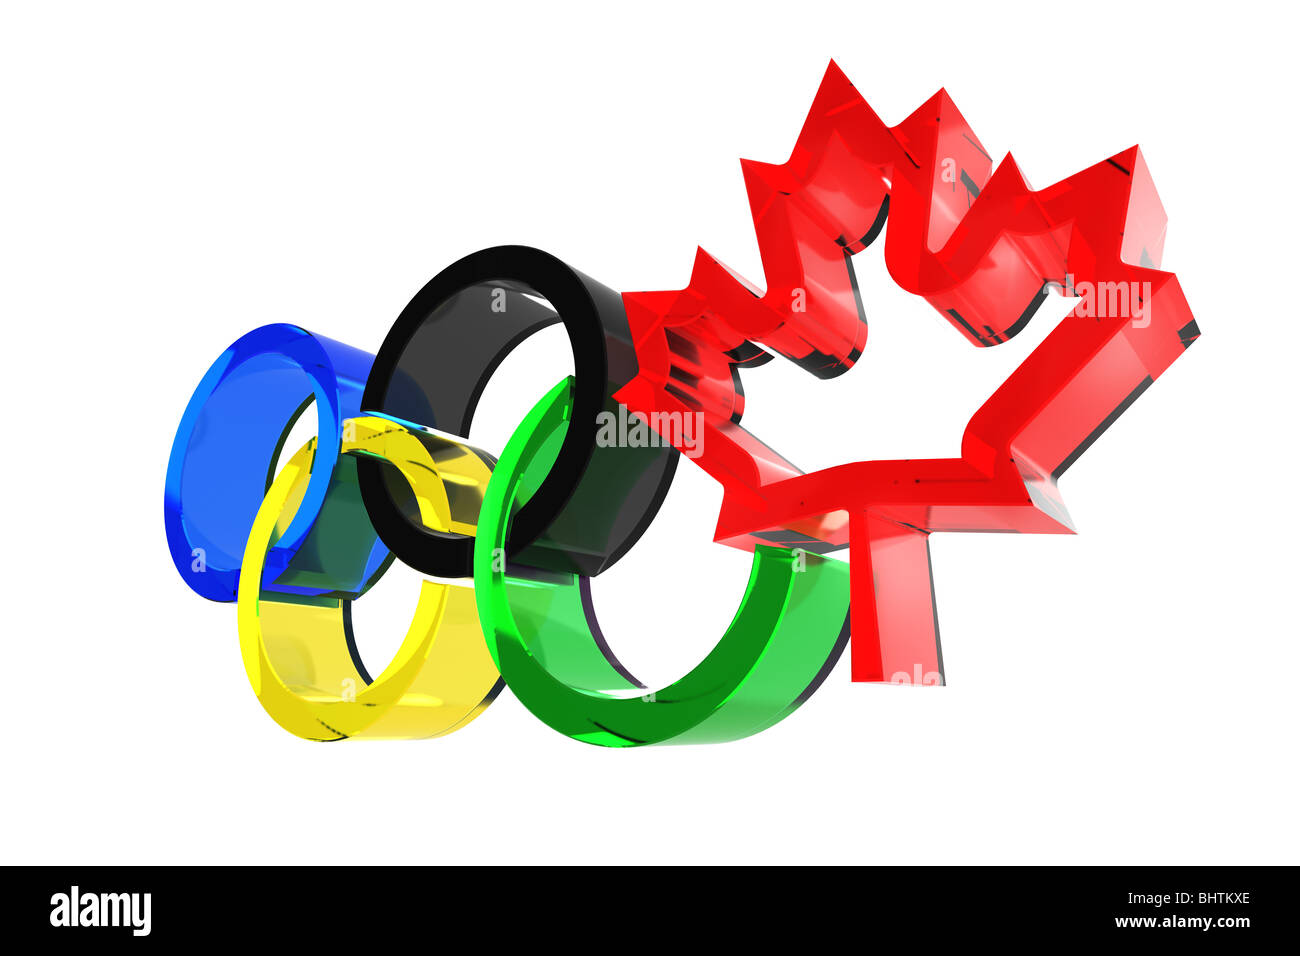 Olympic rings with a Canada maple leaf symbol. Vancouver 2010 Olympic concept. Isolated on white background. Stock Photo